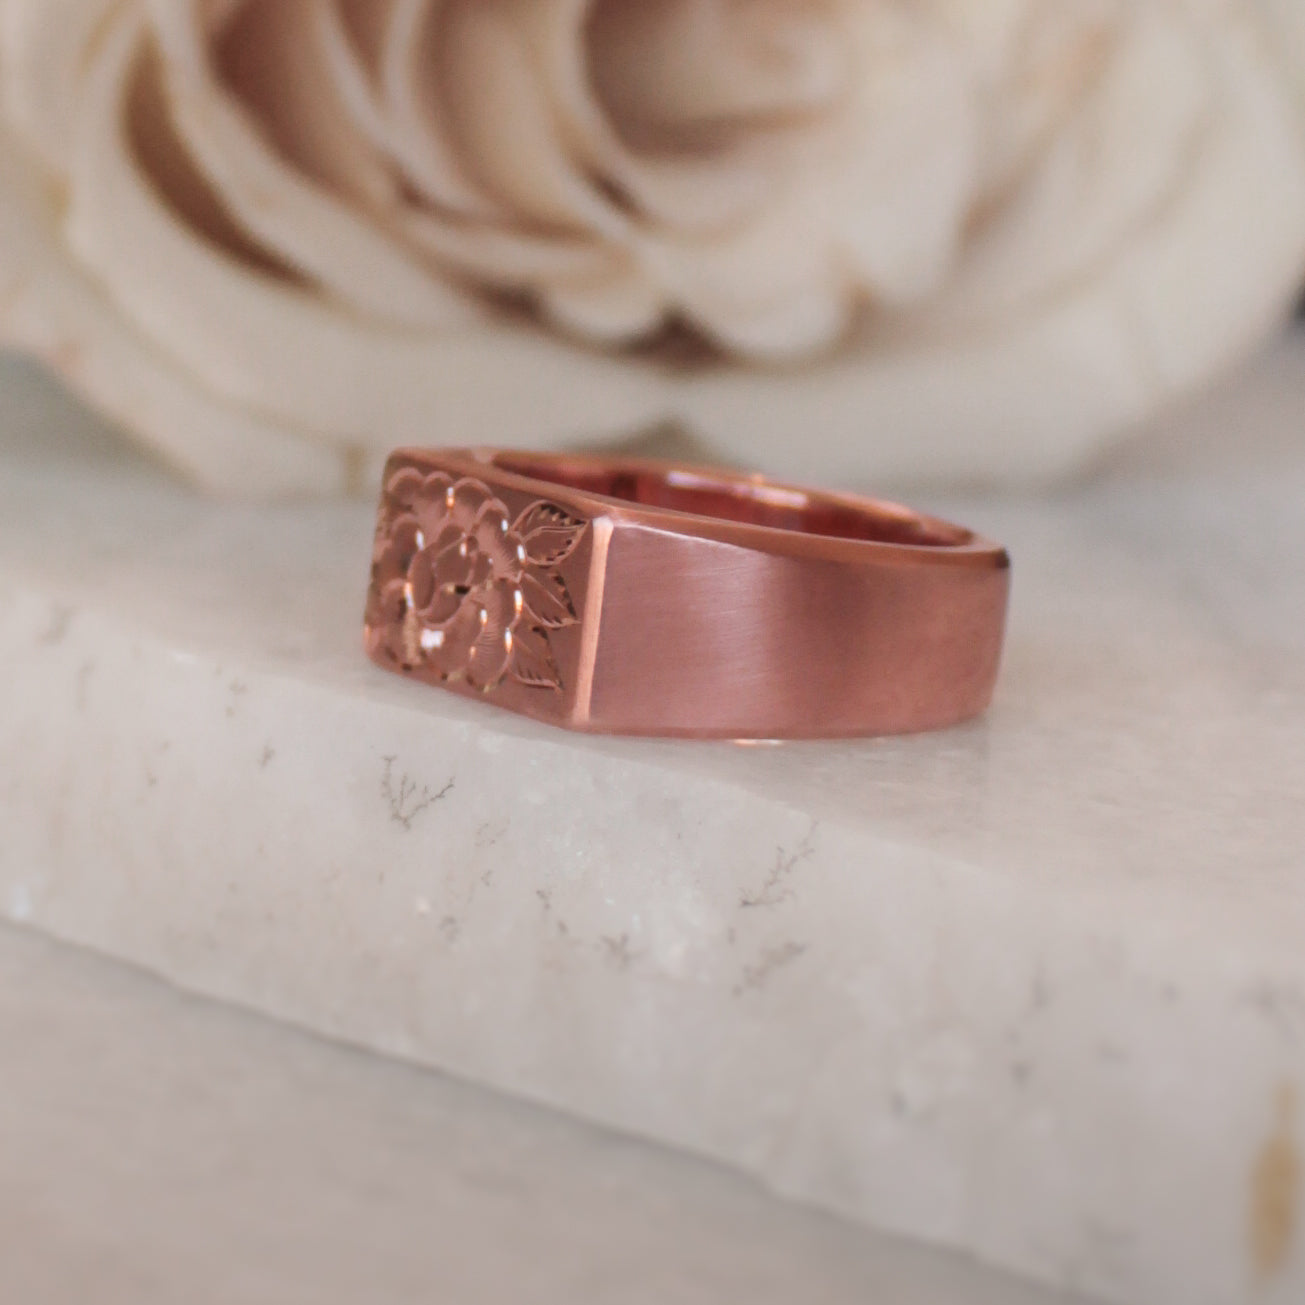 lush rose gold signet ring , with a single rose engraved on side and top